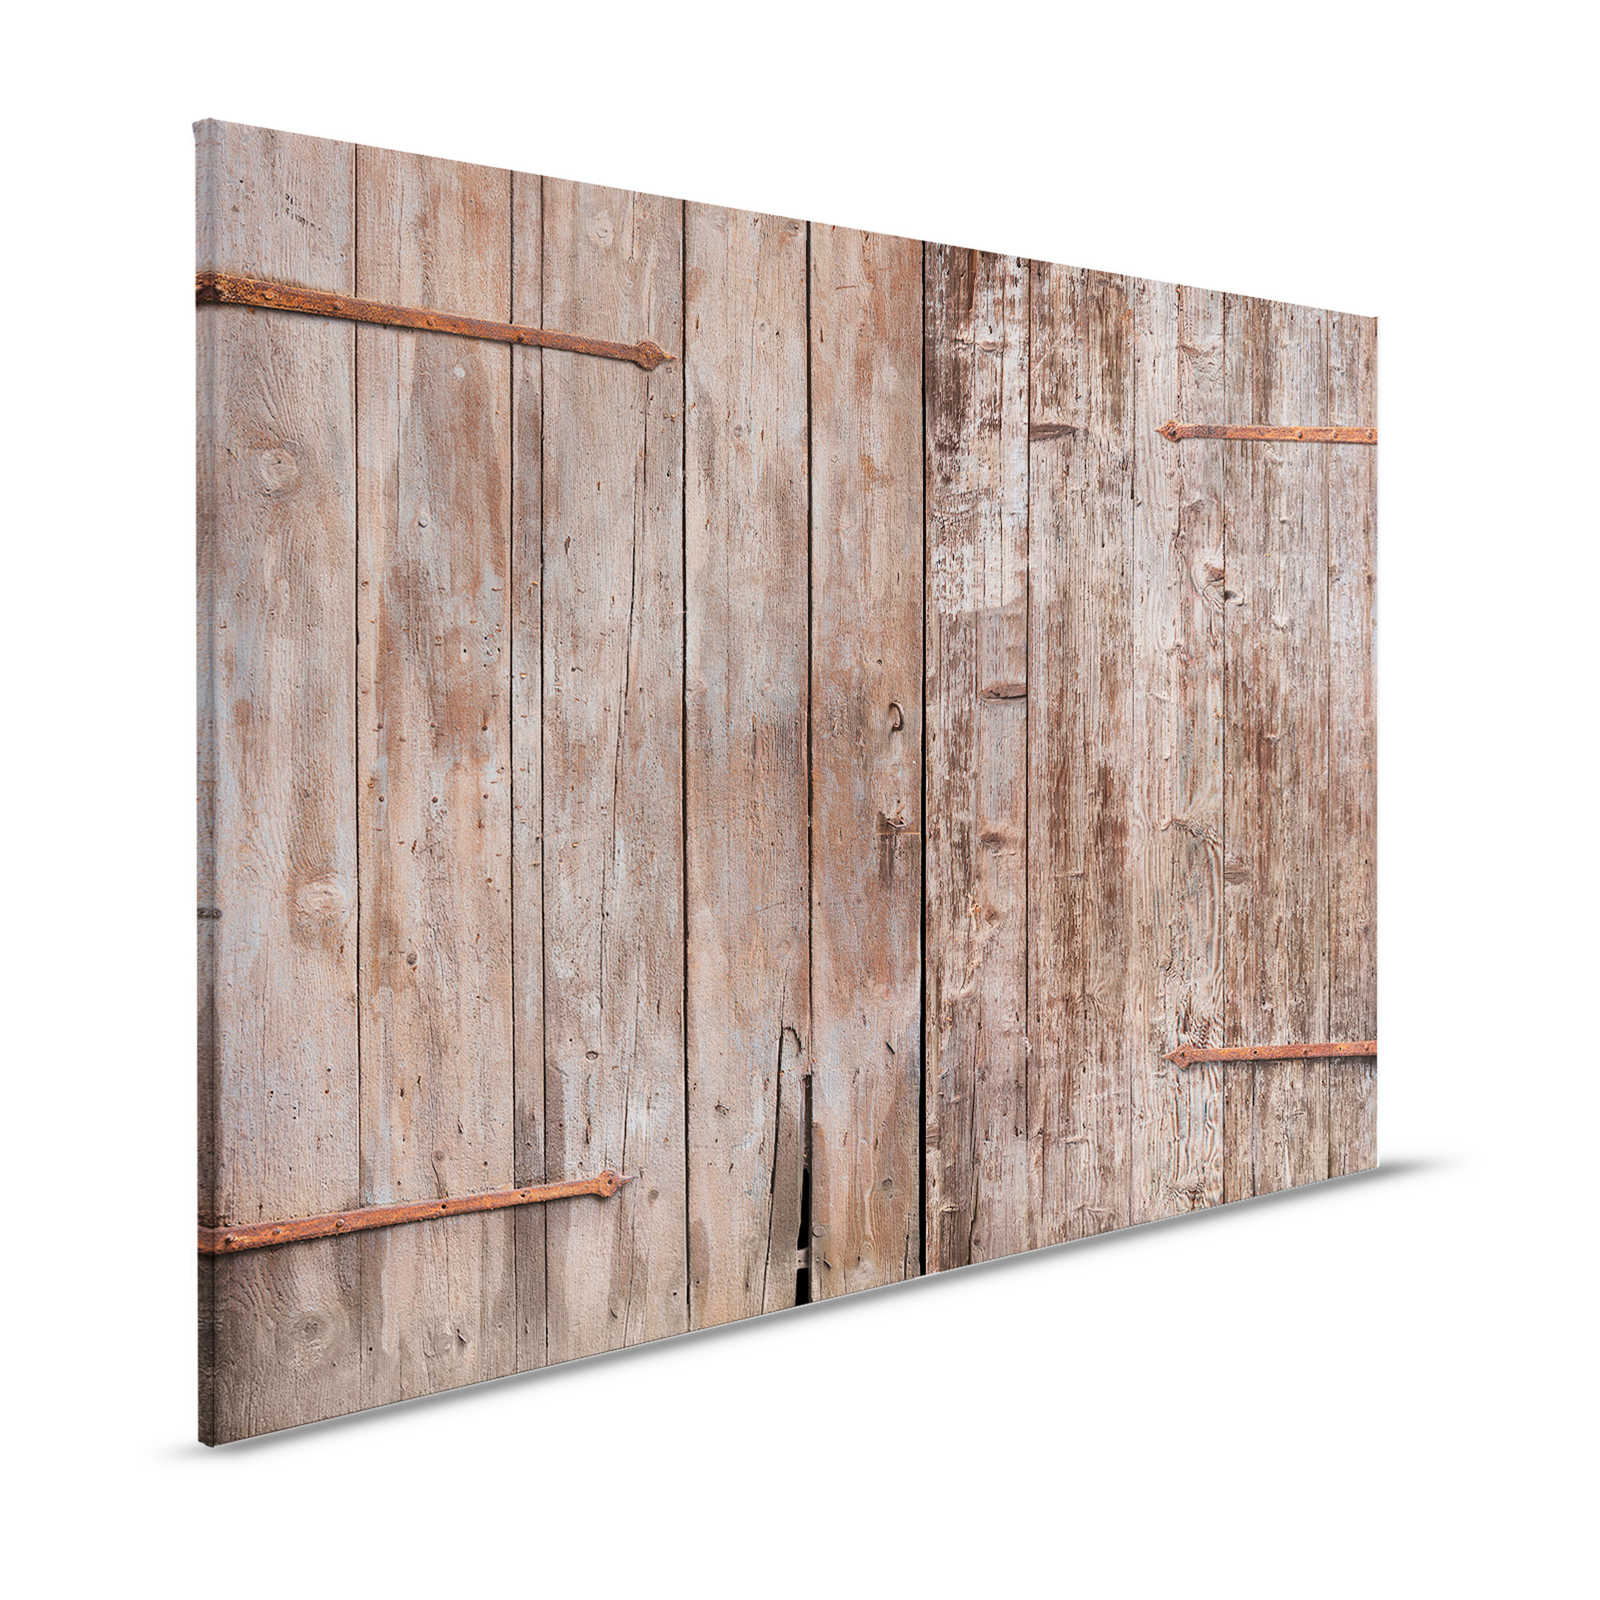 Wooden Canvas Painting Barn Door Used Look - 1.20 m x 0.80 m
